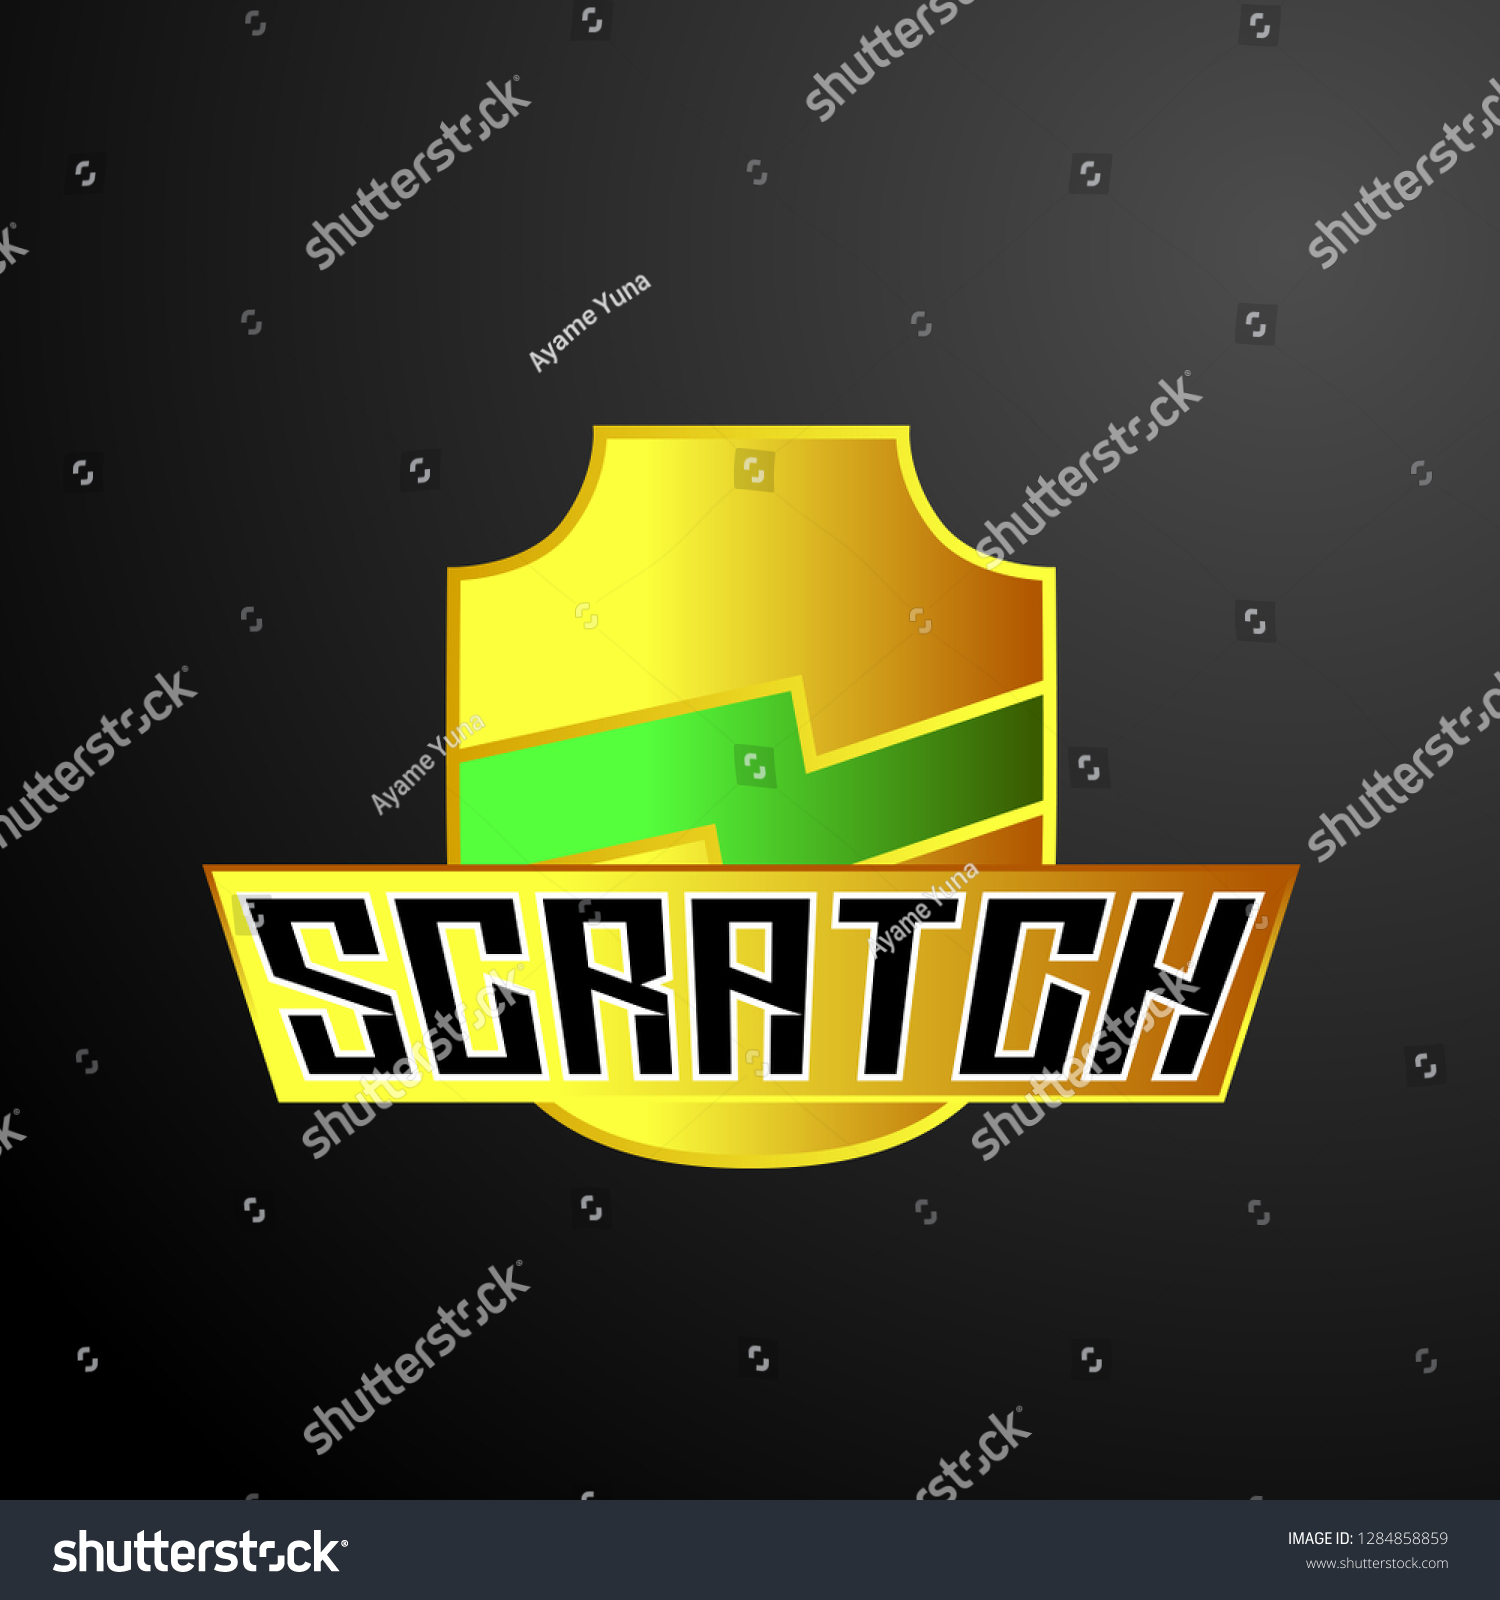 scratch logo with shield symbol, vector #1284858859